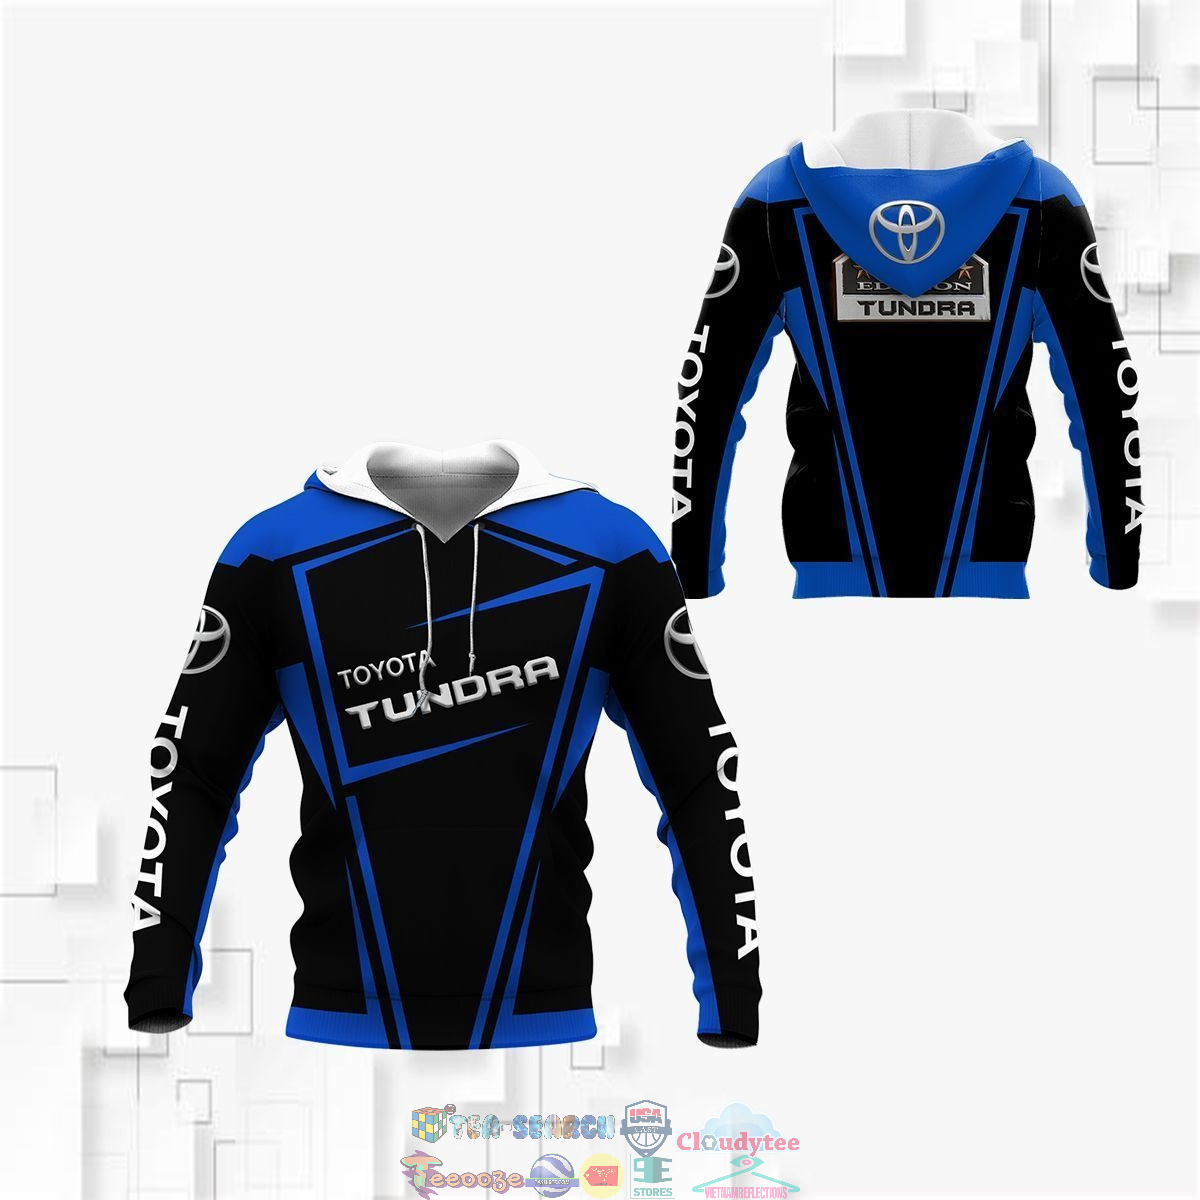 Toyota Tundra ver 6 3D hoodie and t-shirt